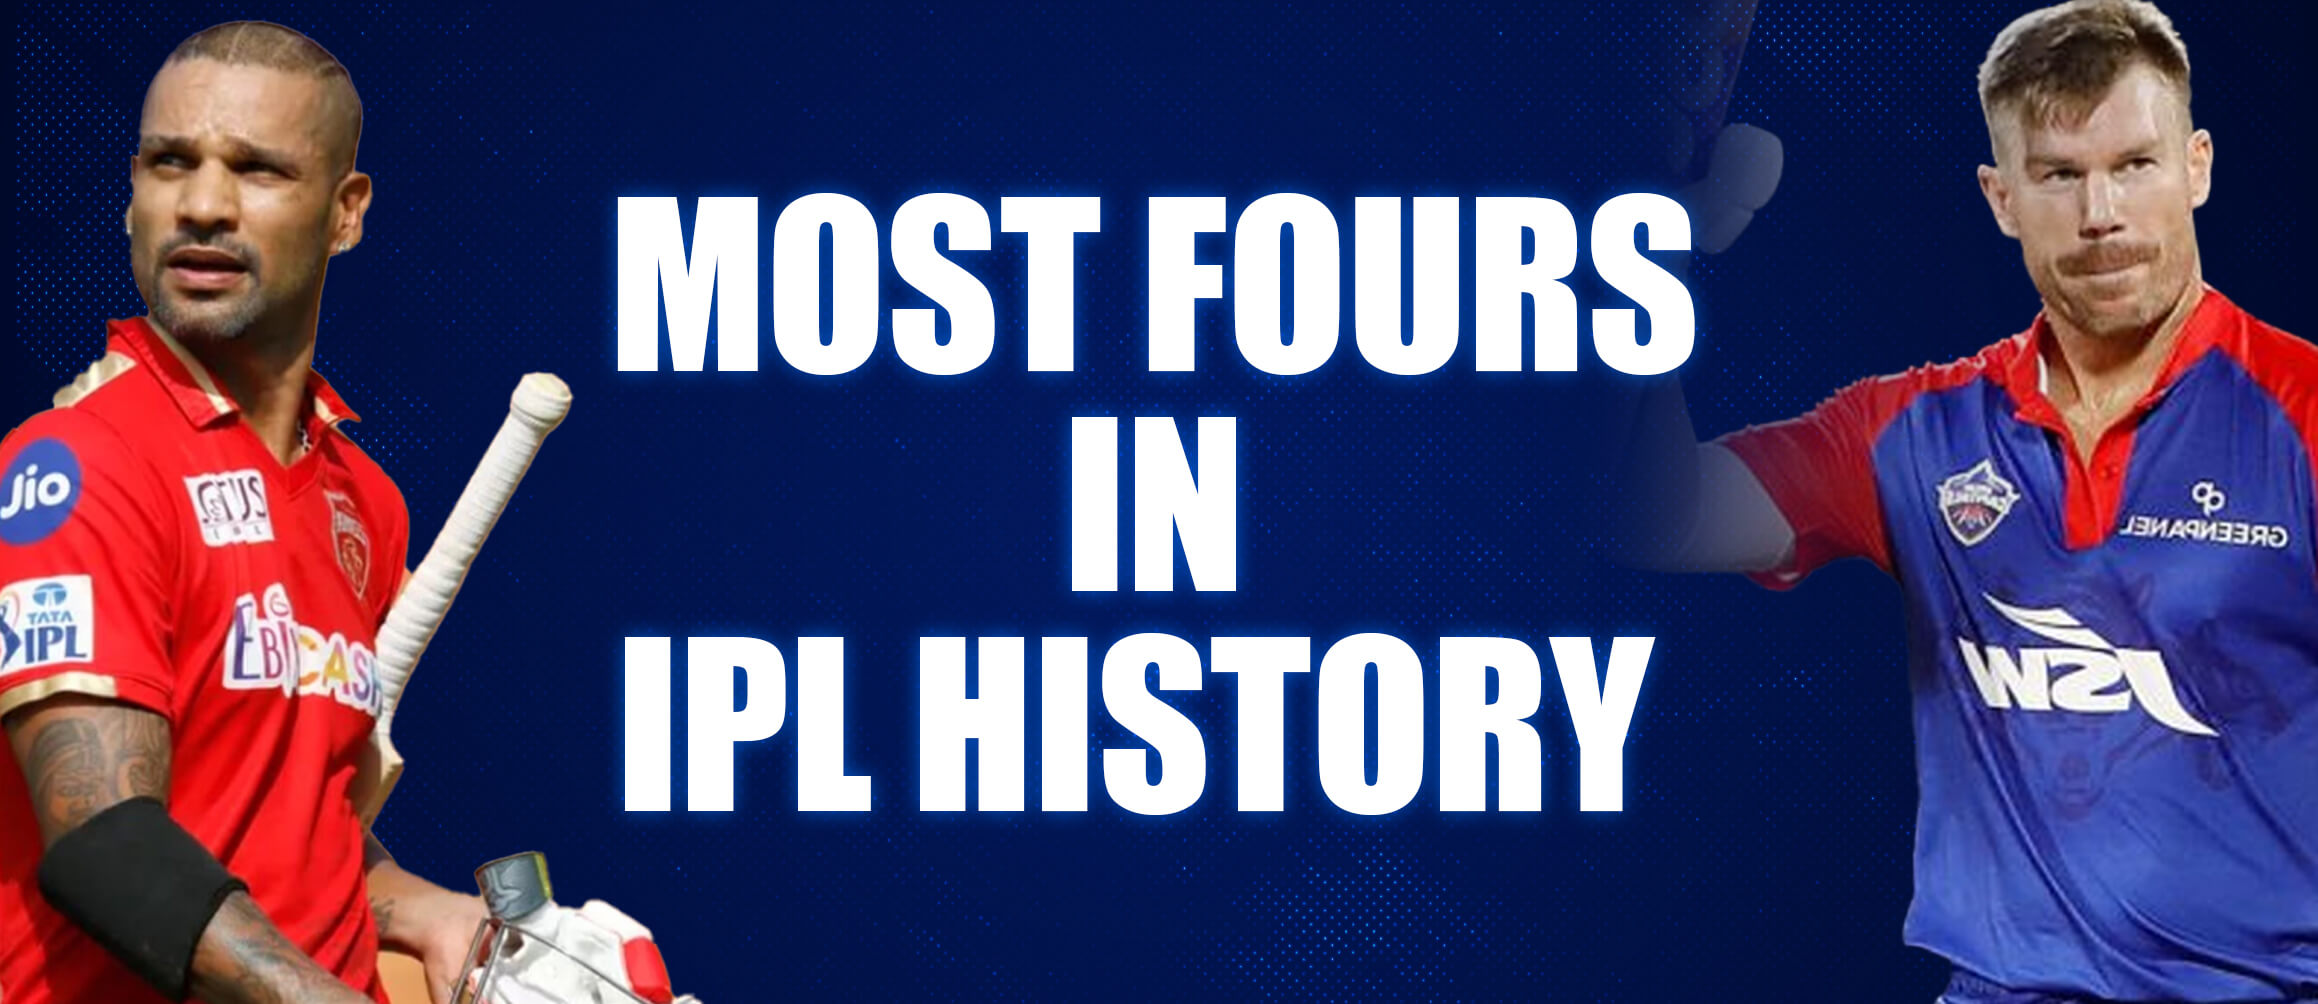 Most Fours in IPL History